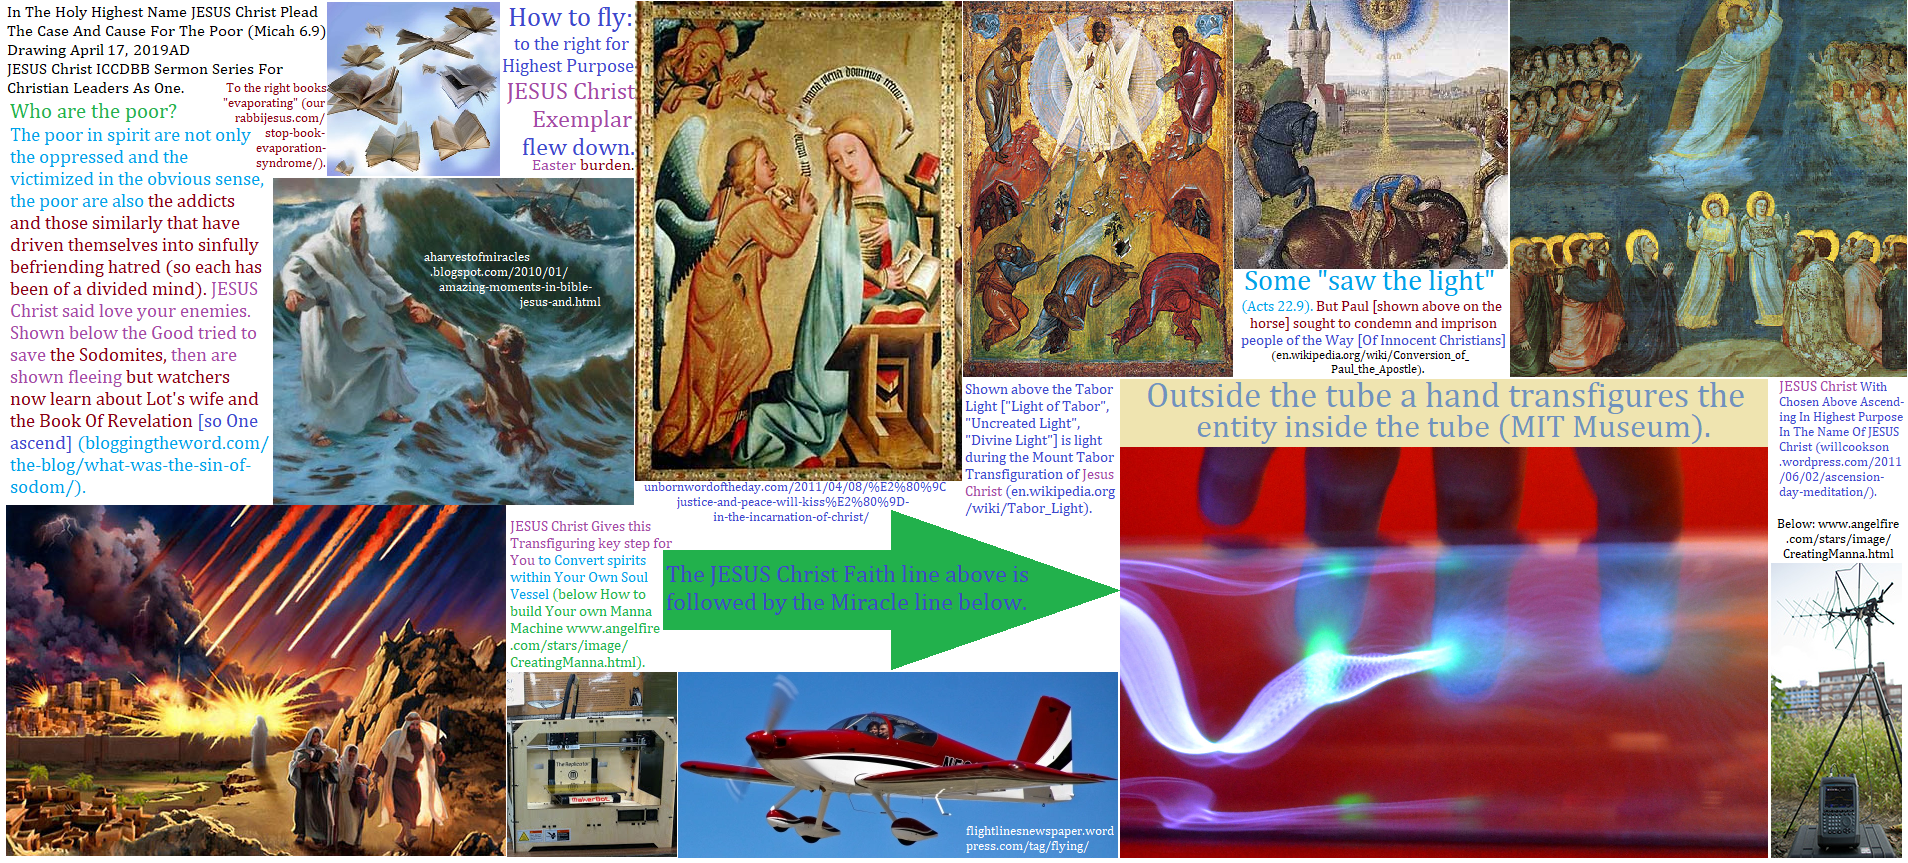 Christian Leader President Don Trump Prophetic Signing Benefits news Miracles Of Faith for the nations USA Israel Zion We The People Preamble More Perfect Union Blessings of Liberty Constitution United States of America constitutioncenter.org ICCDBB ancient ufos aliens stars plasma glory lots wife manna machine from Heaven airplane space force tabor light Peter Paul Mary Create Uncreated Highest Anew wireless 2019 2020AD www.angelfire.com/dc/gov/jesusholyspirit.html JESUS Christ